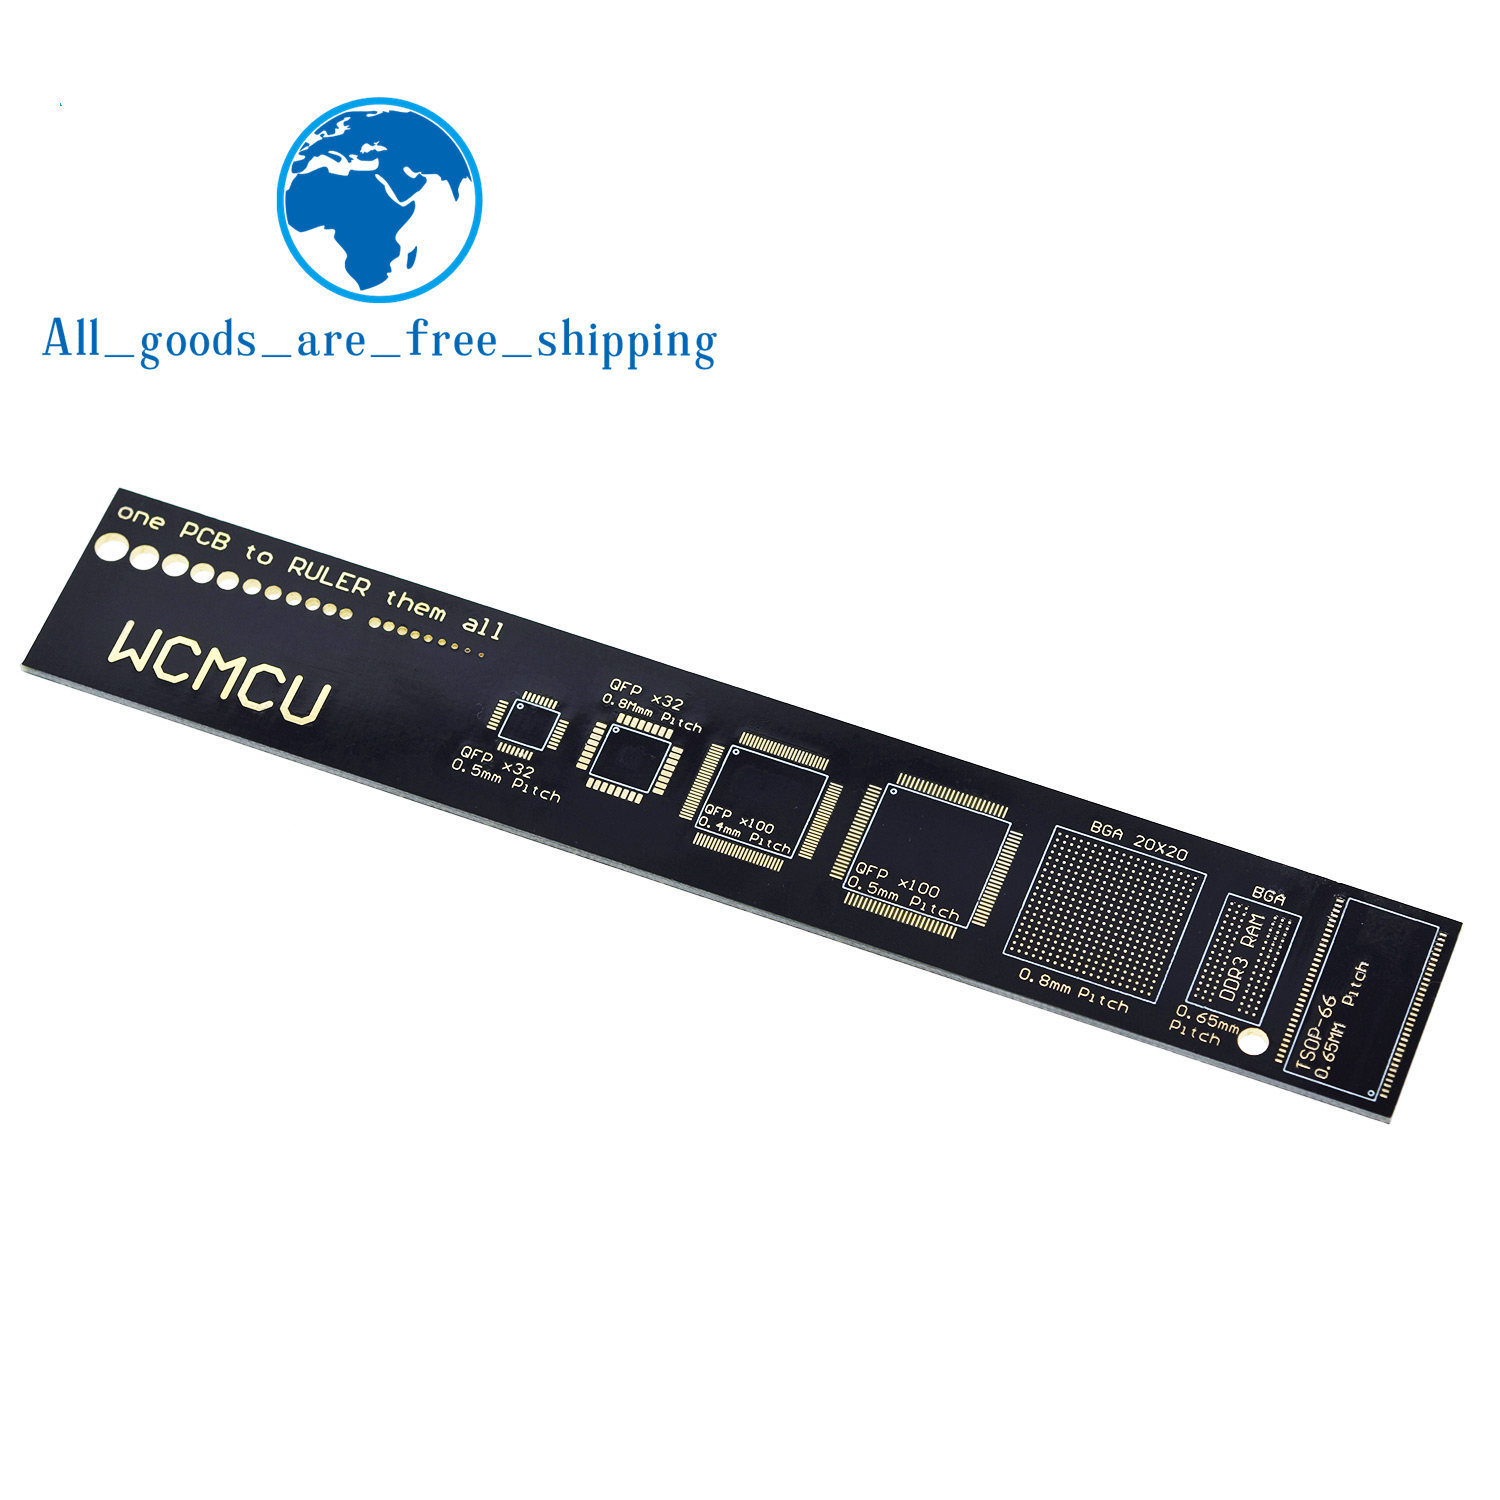 PCB Ruler v2-6" for Electronic Engineers/Geeks/Makers/Arduino Fans 